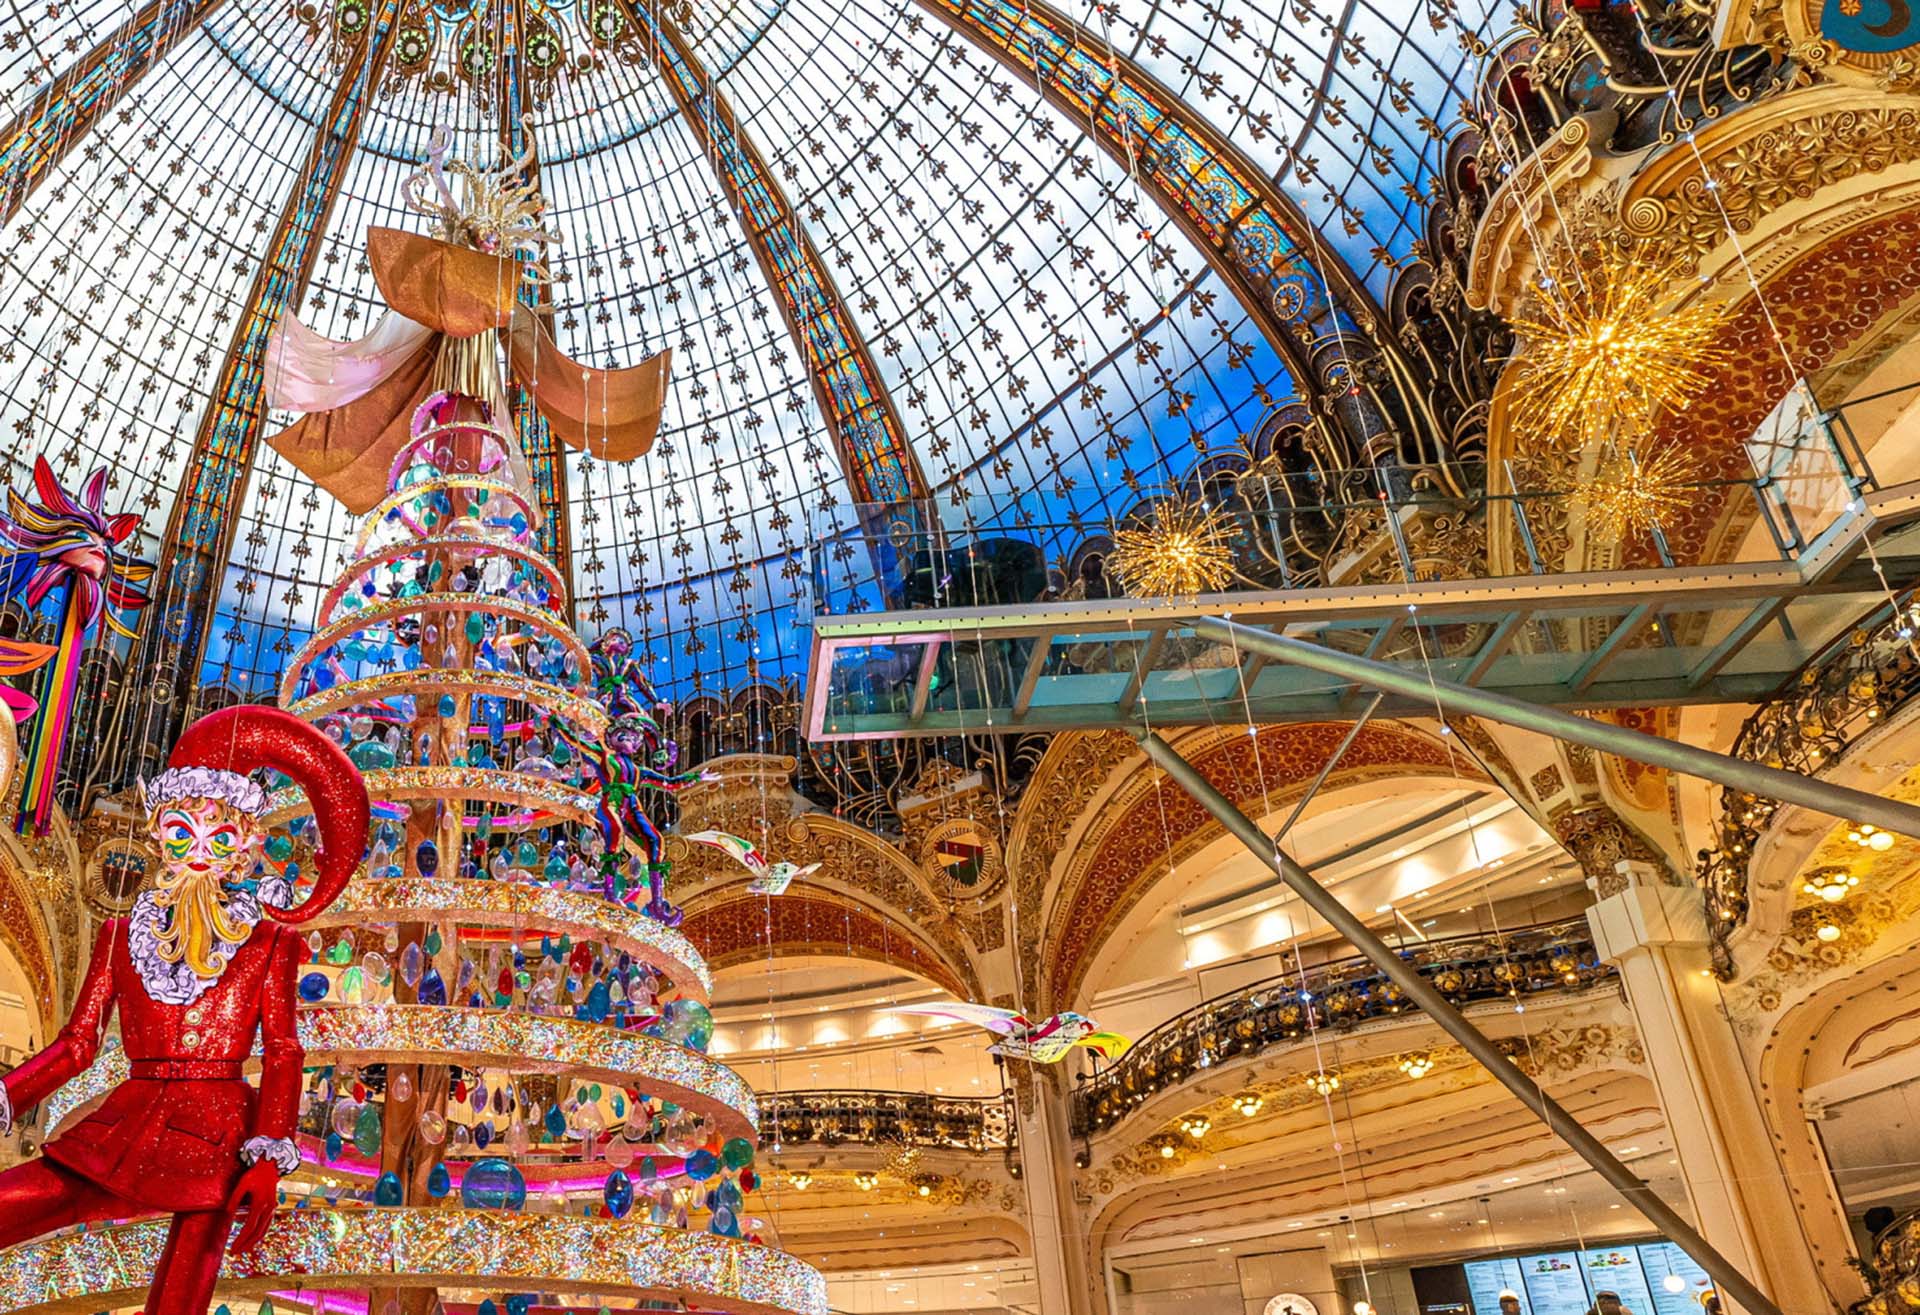 10 FREE activities to do in Paris for the Holidays